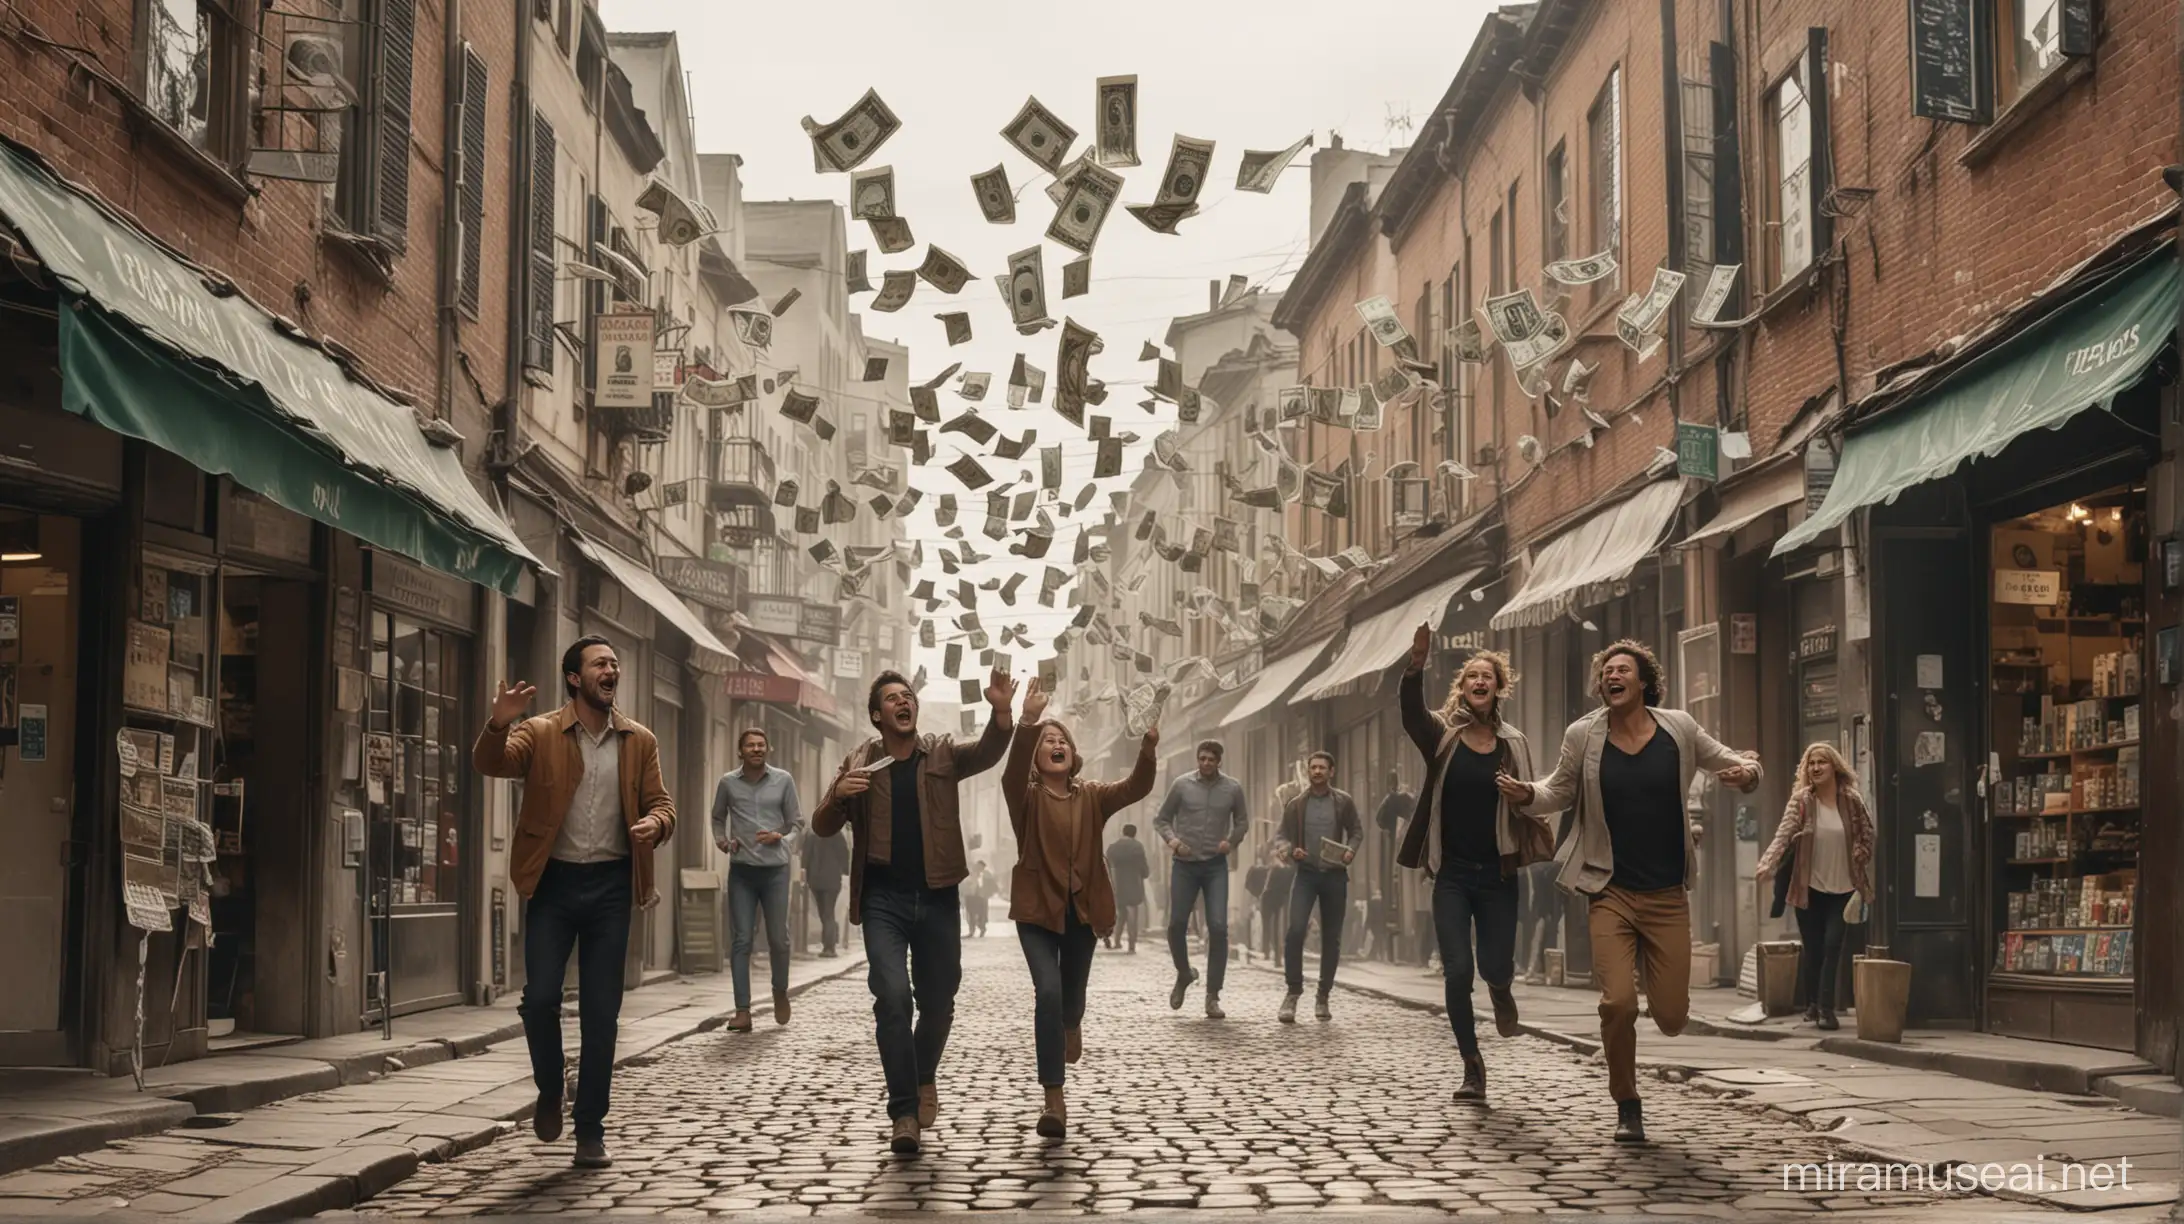 An old street, with an old shop on it, to which people are running from different directions. These people are holding dollar bills in their hands, banknotes are flying above them in the air. Everyone wants to give their money to the store.
